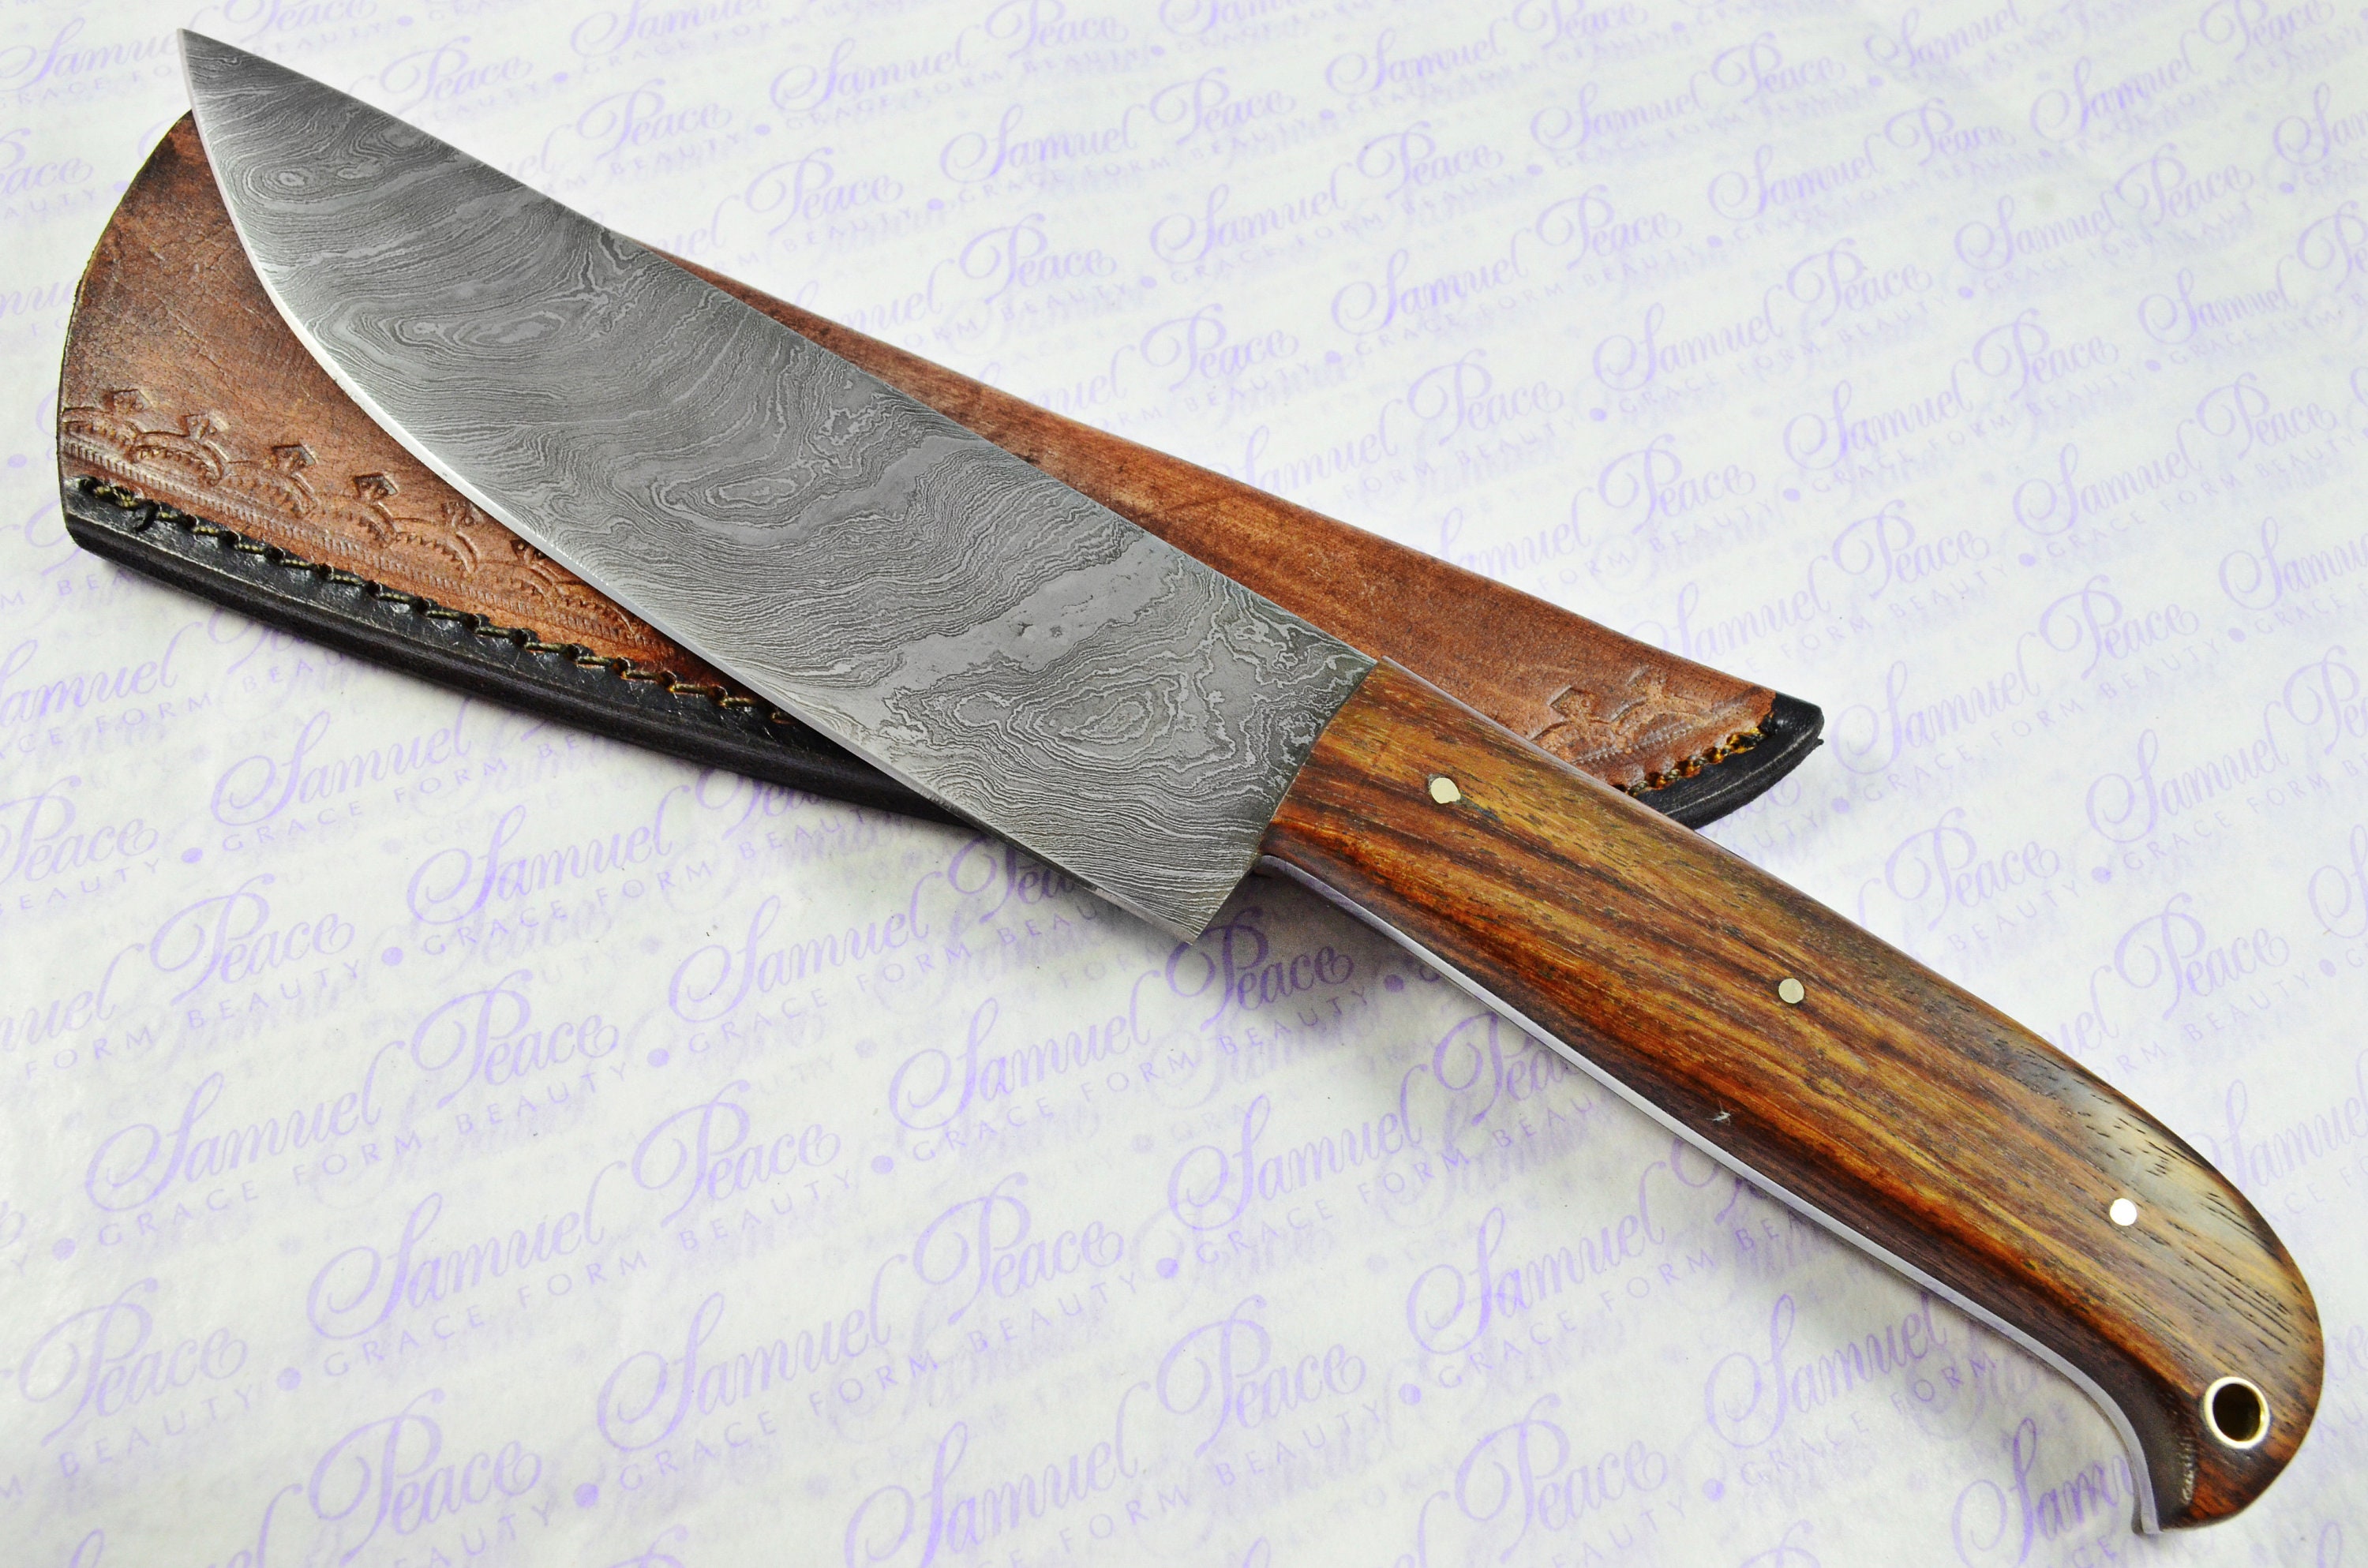  Kitchen perfection Handmade Chefs Knife - Extremely